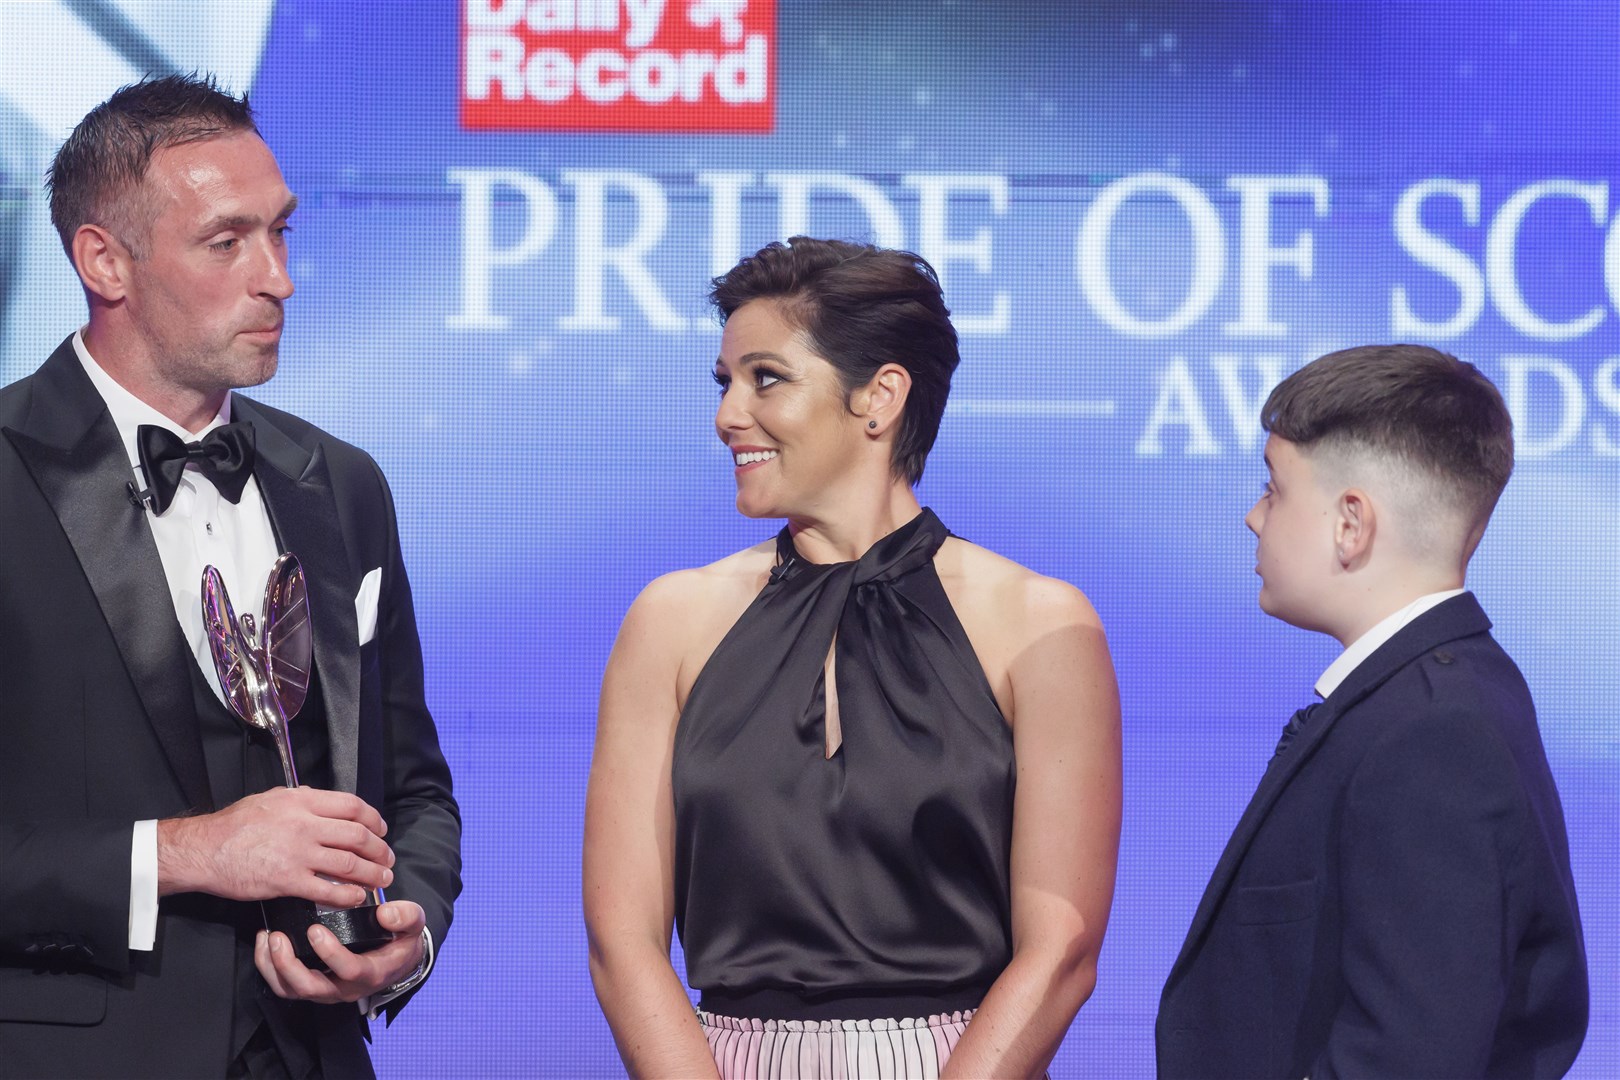 Keiran Reid (12), of Avoch, is honoured as a Child of Courage in the Pride of Scotland Awards.